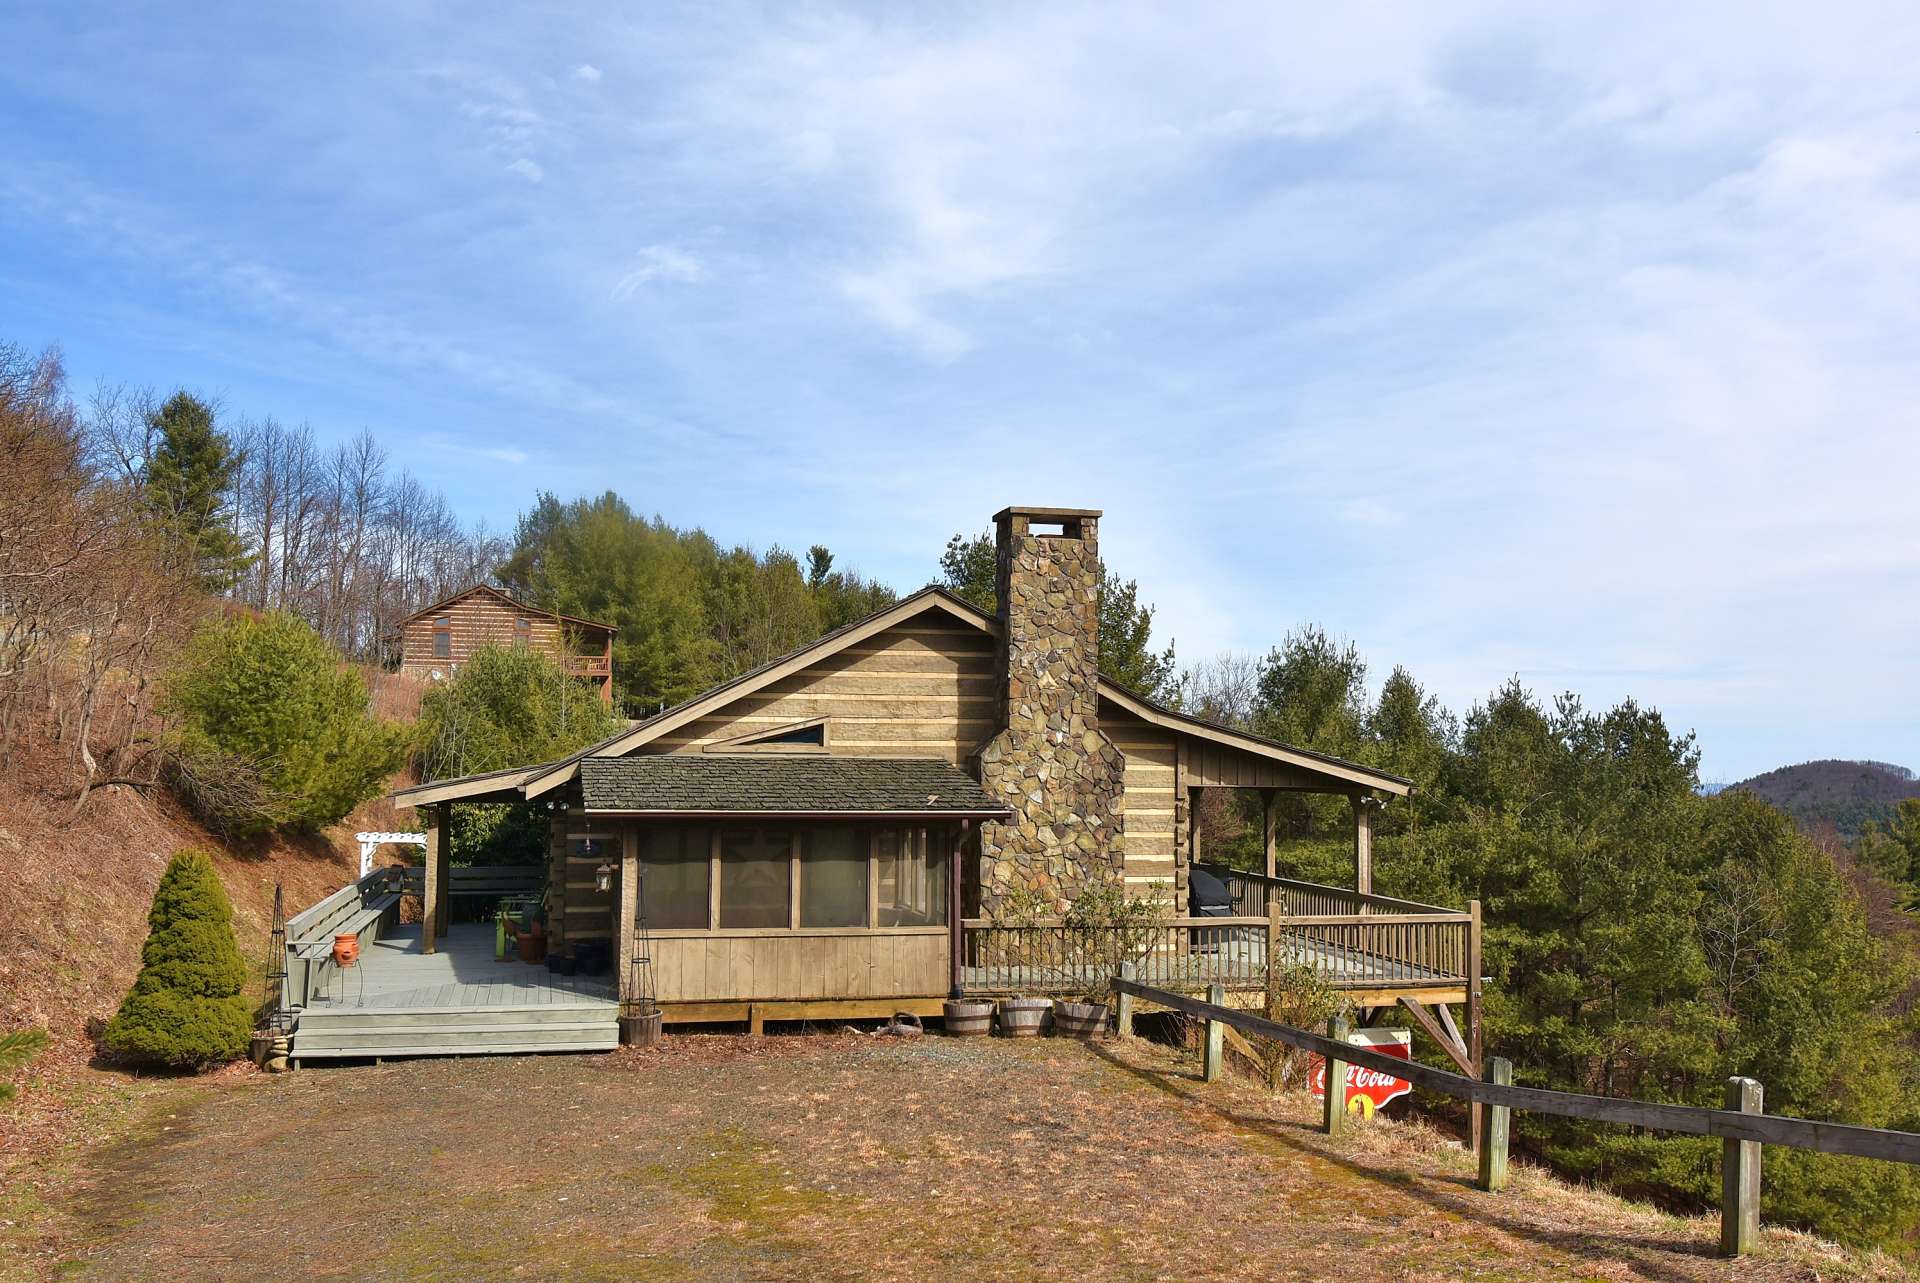 Offered at $359,900, this  NC log cabin  with long range Blue Ridge Parkway views is located in  the Cannon Acres community off of Thistle Hill Lane.   If you are looking for a log cabin  retreat or primary residence in the North Carolina Mountains, call for more information on listing B166.